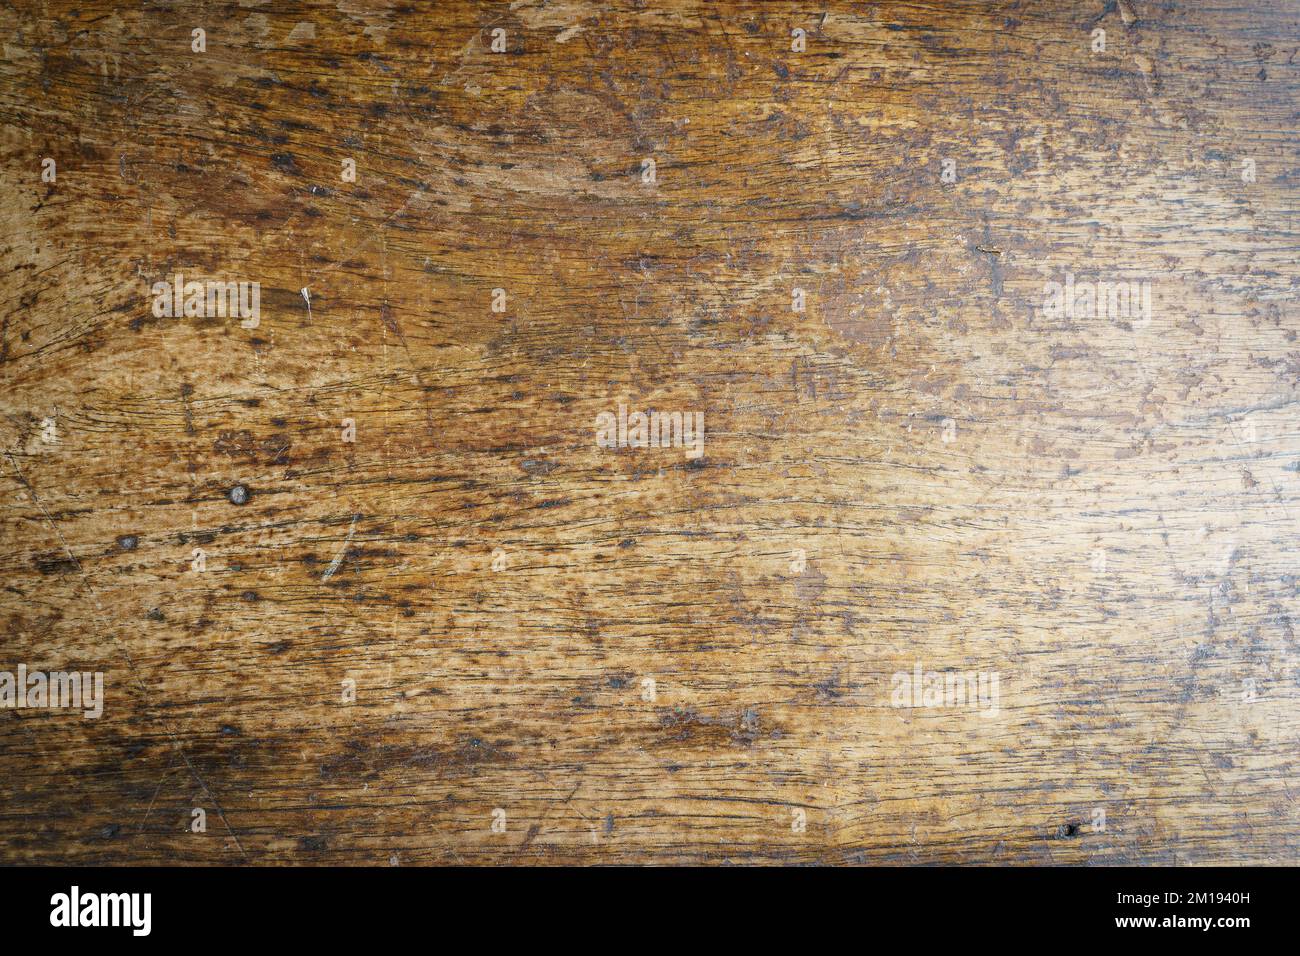 Wooden rustic background. Old wooden surface with texture. High quality photo Stock Photo